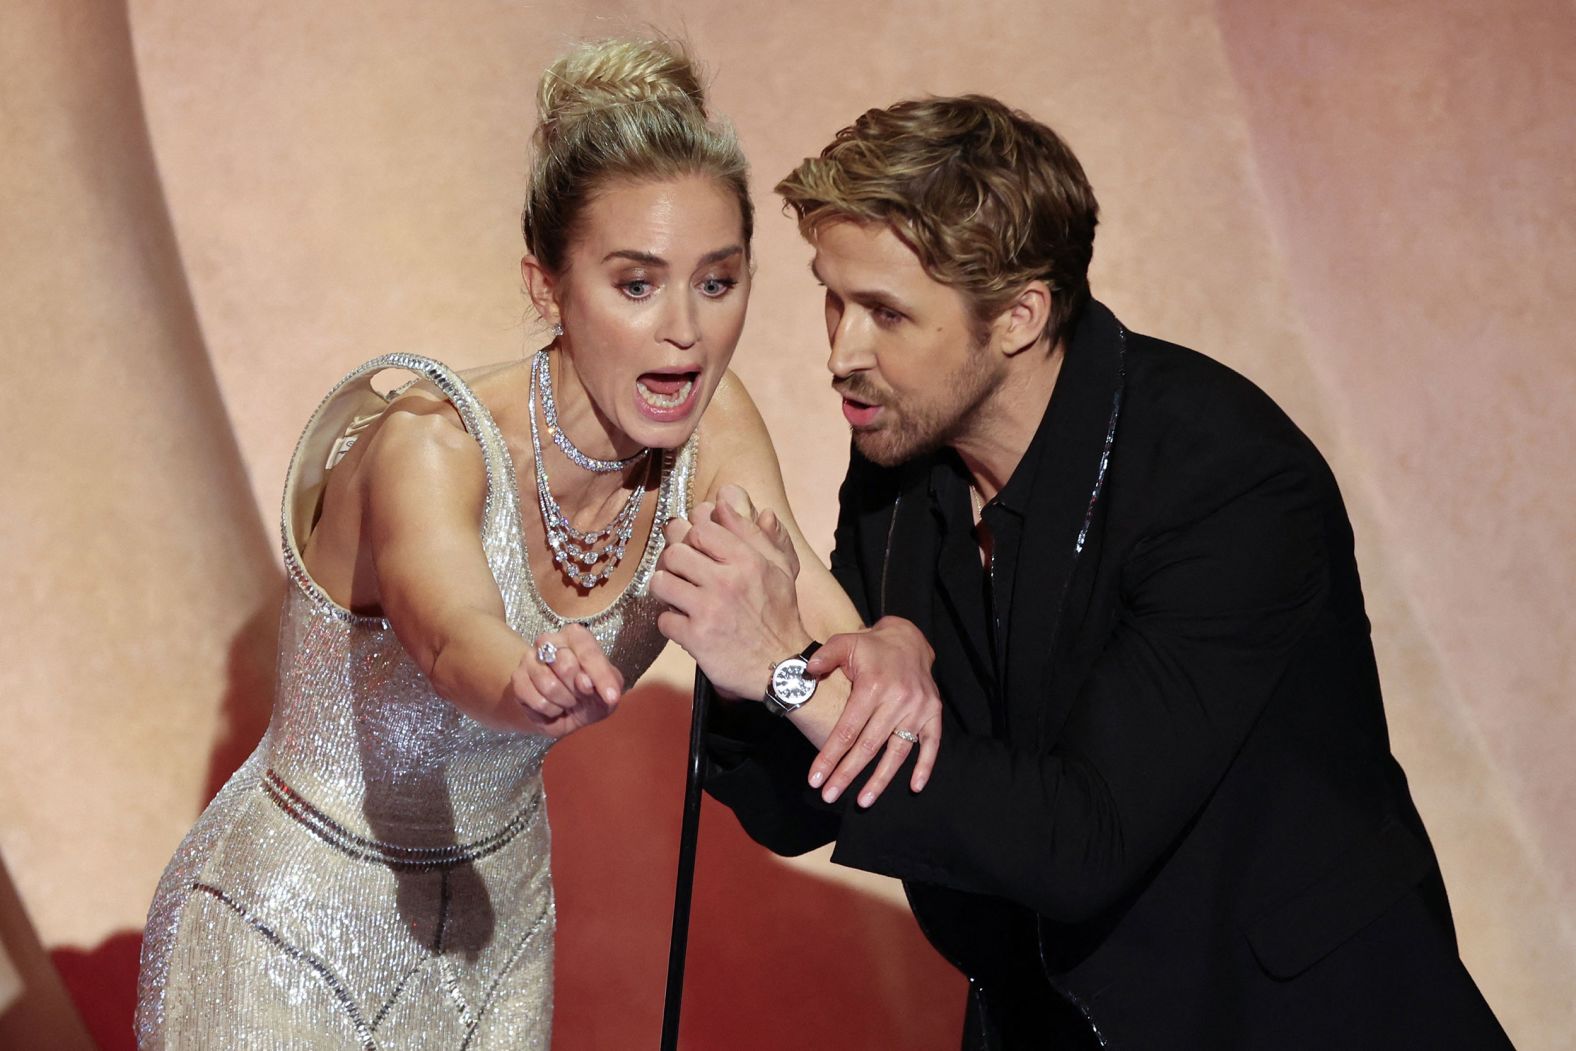 Gosling and Emily Blunt <a href="index.php?page=&url=https%3A%2F%2Fwww.cnn.com%2Fentertainment%2Flive-news%2Foscars-academy-awards-03-10-24%2Fh_7aa523c4b40057ef03b7ed2bead42316" target="_blank">were in competitive mode</a> while on stage together during the show. <a href="index.php?page=&url=https%3A%2F%2Fwww.cnn.com%2Fentertainment%2Flive-news%2Foscars-academy-awards-03-10-24%2Fh_7aa523c4b40057ef03b7ed2bead42316" target="_blank">They exchanged playful barbs</a> over their their films "Barbie" and "Oppenheimer."